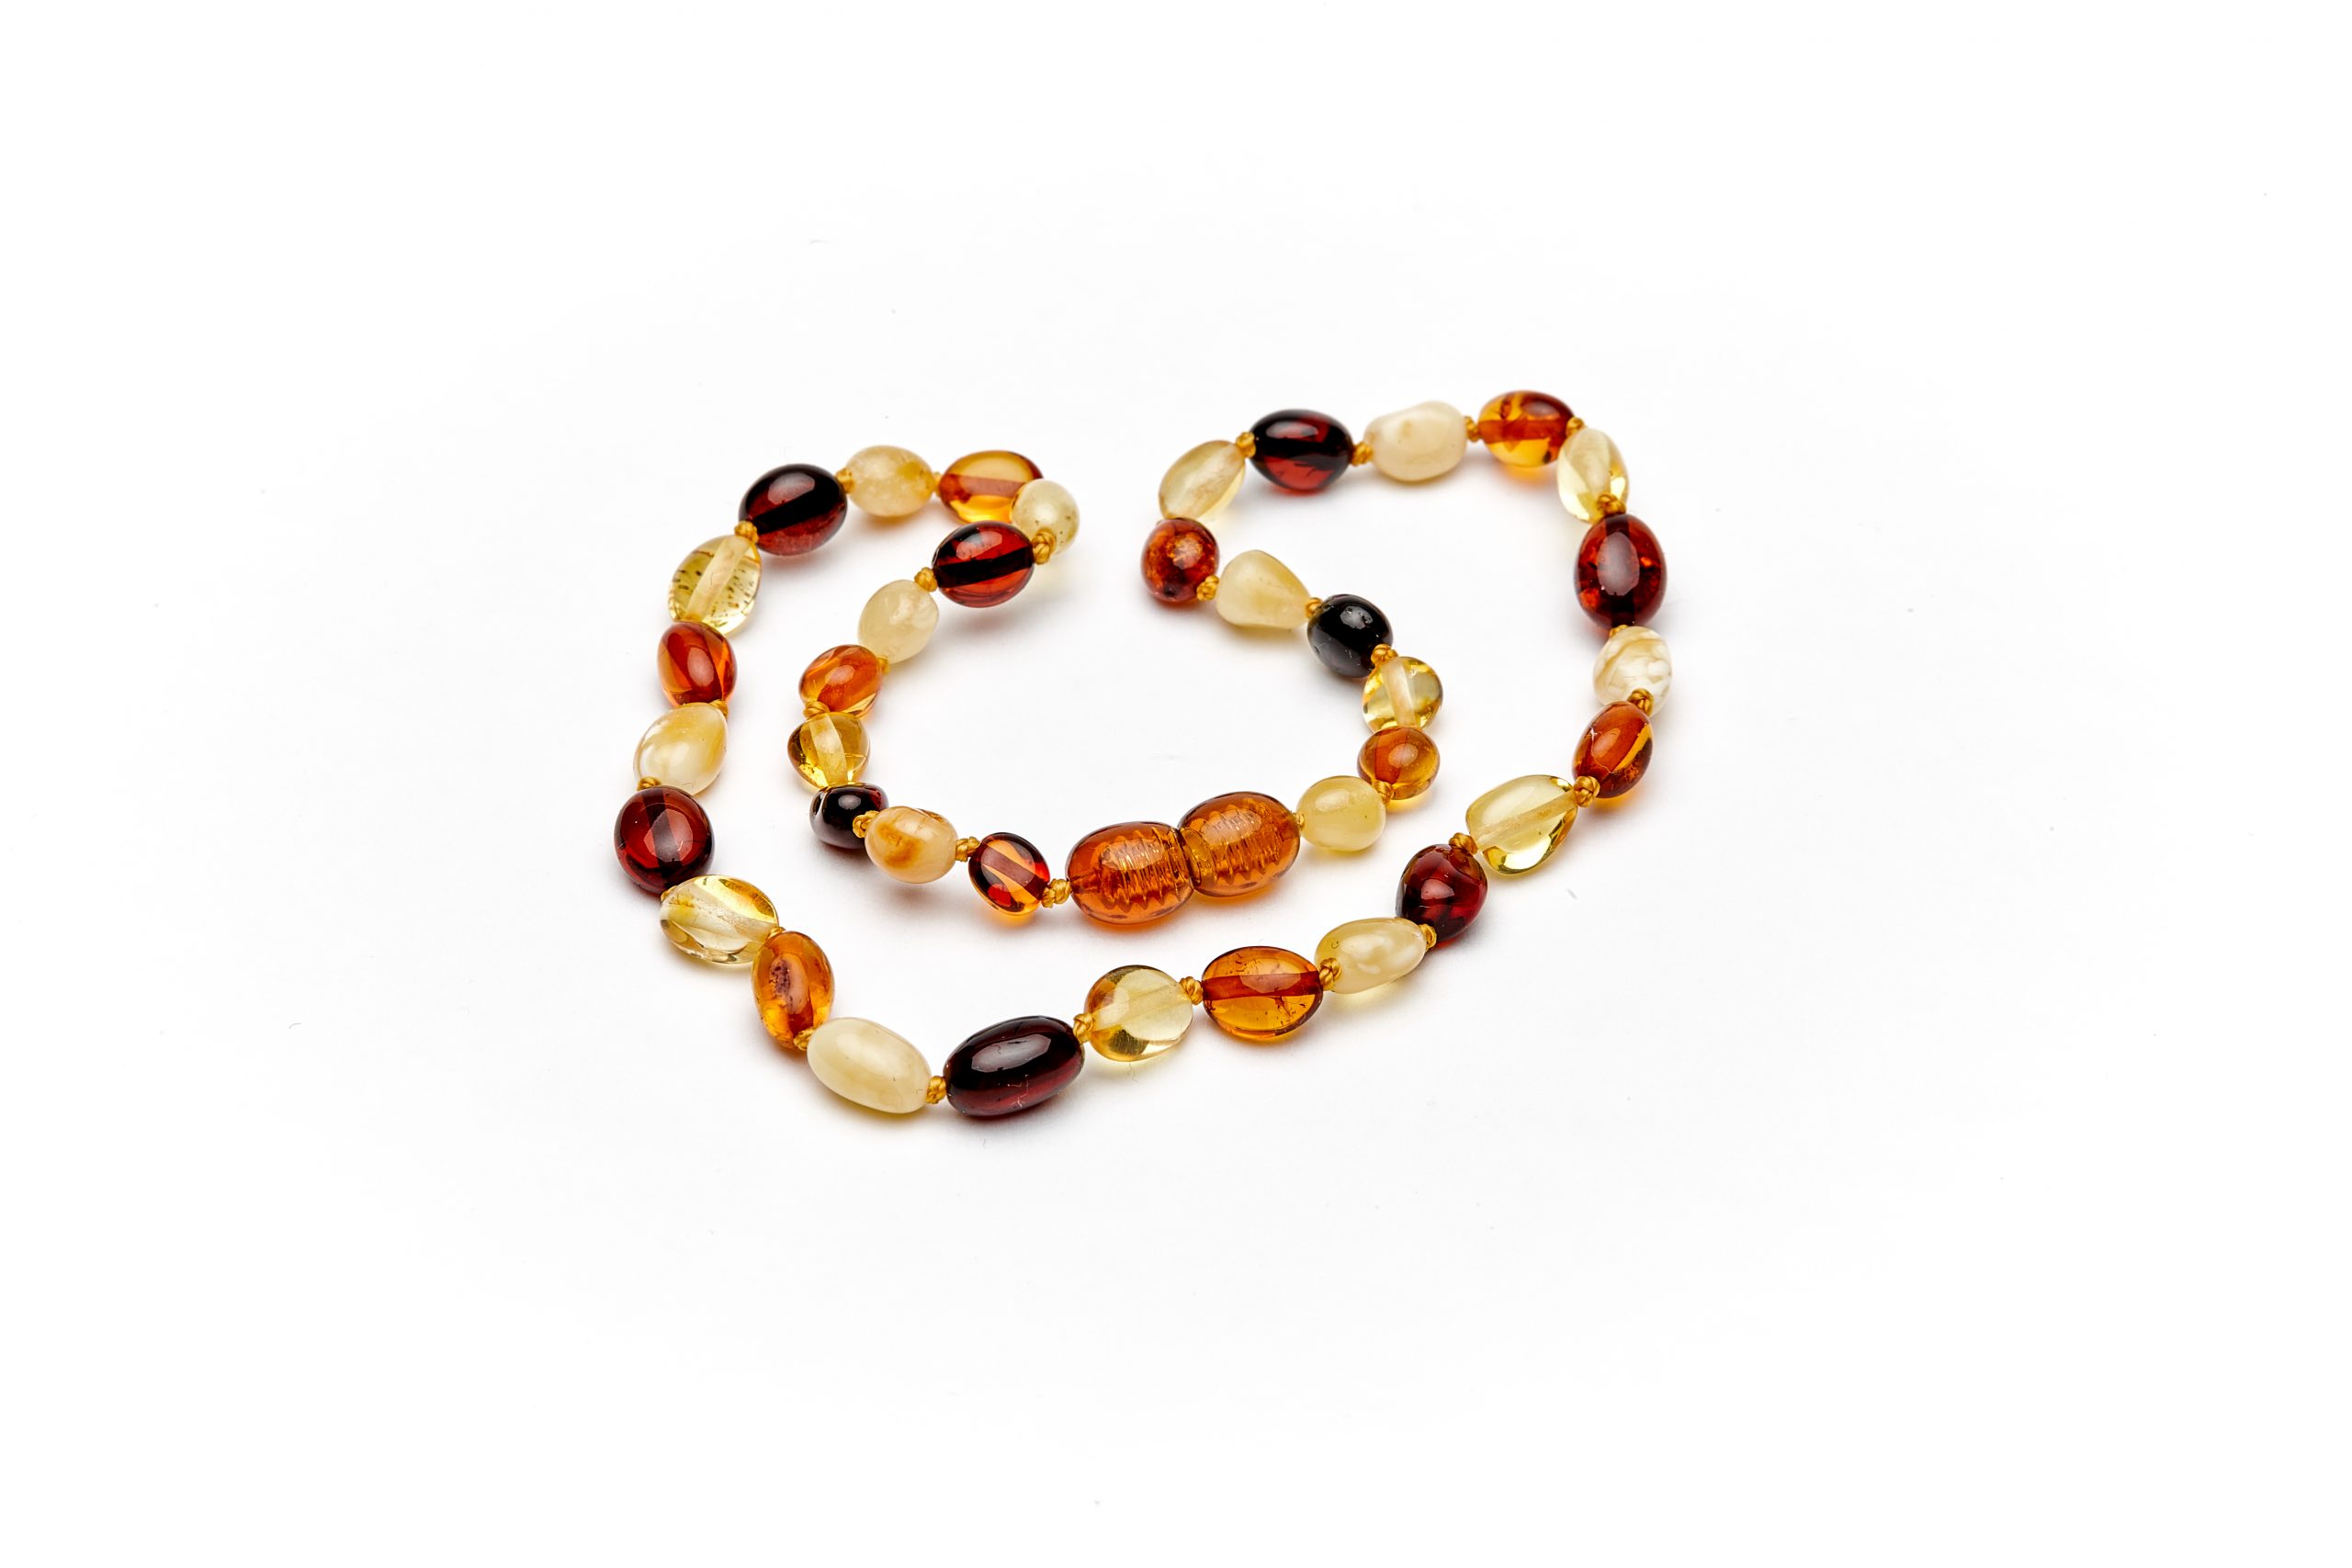 Baltic amber baby necklace cognac olive oval beads 33 cm /13 inch 